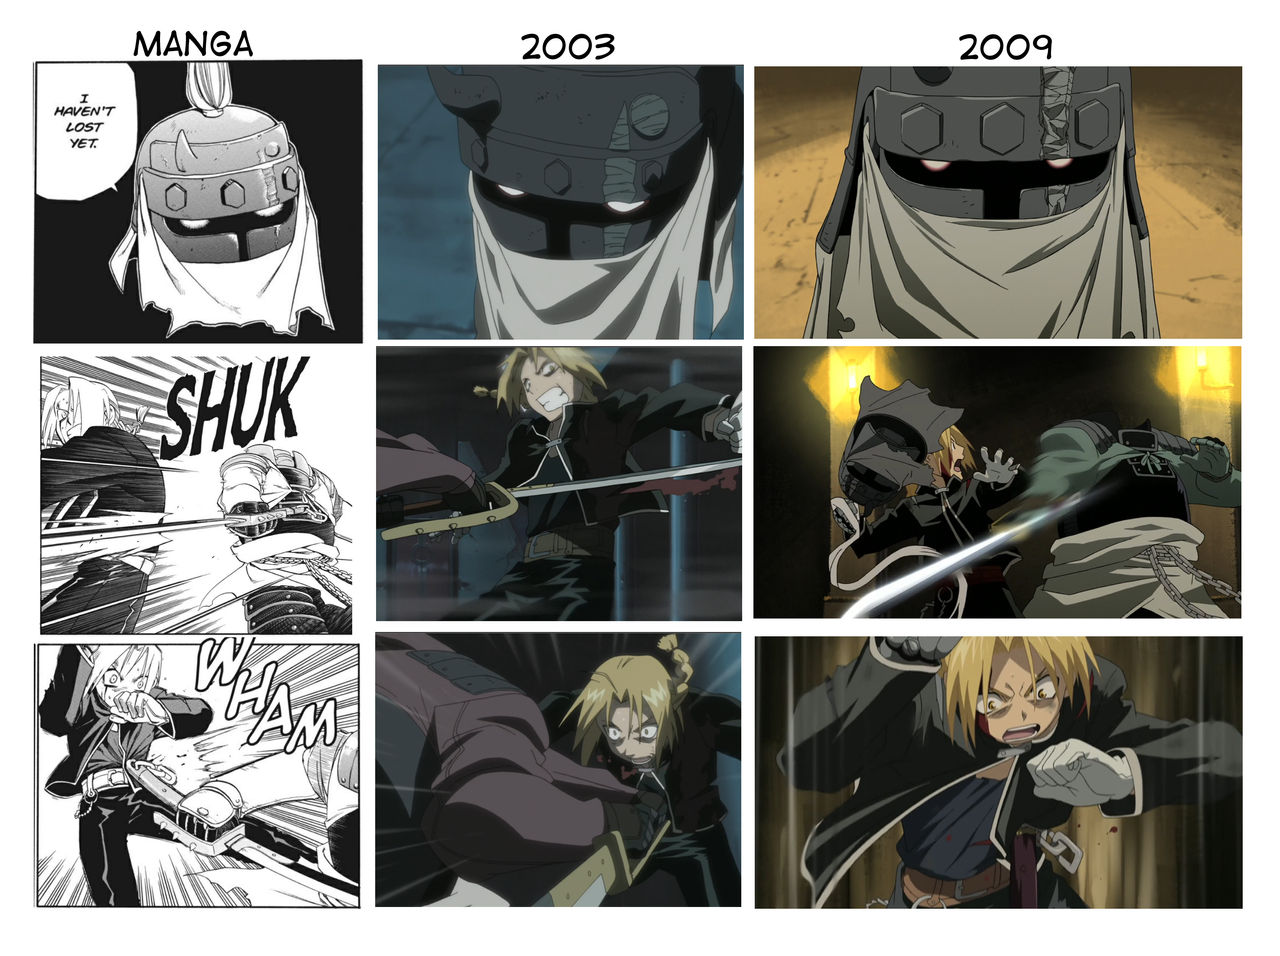 Fullmetal Alchemist: Differences between the 2003 Version